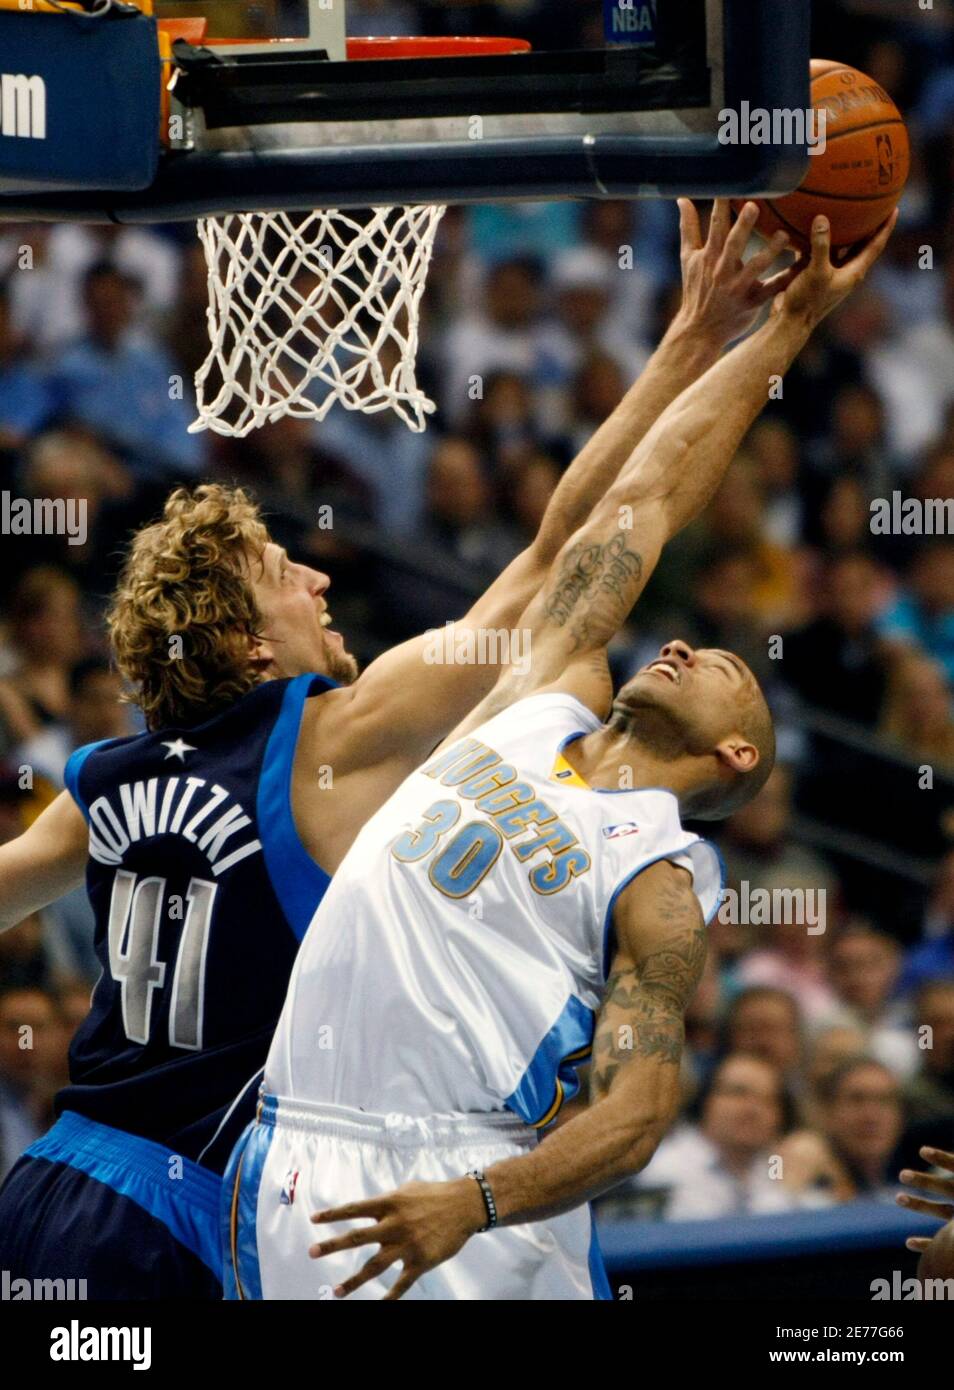 Denver Nuggets guard Dahntay Jones (R) has his shot blocked by Dallas Mavericks forward Dirk Nowitzki (L) in the first quarter of Game 1 of the NBA Western Conference semi-final basketball playoffs in Denver May 3, 2009.  REUTERS/Rick Wilking (UNITED STATES SPORT BASKETBALL) Stock Photo